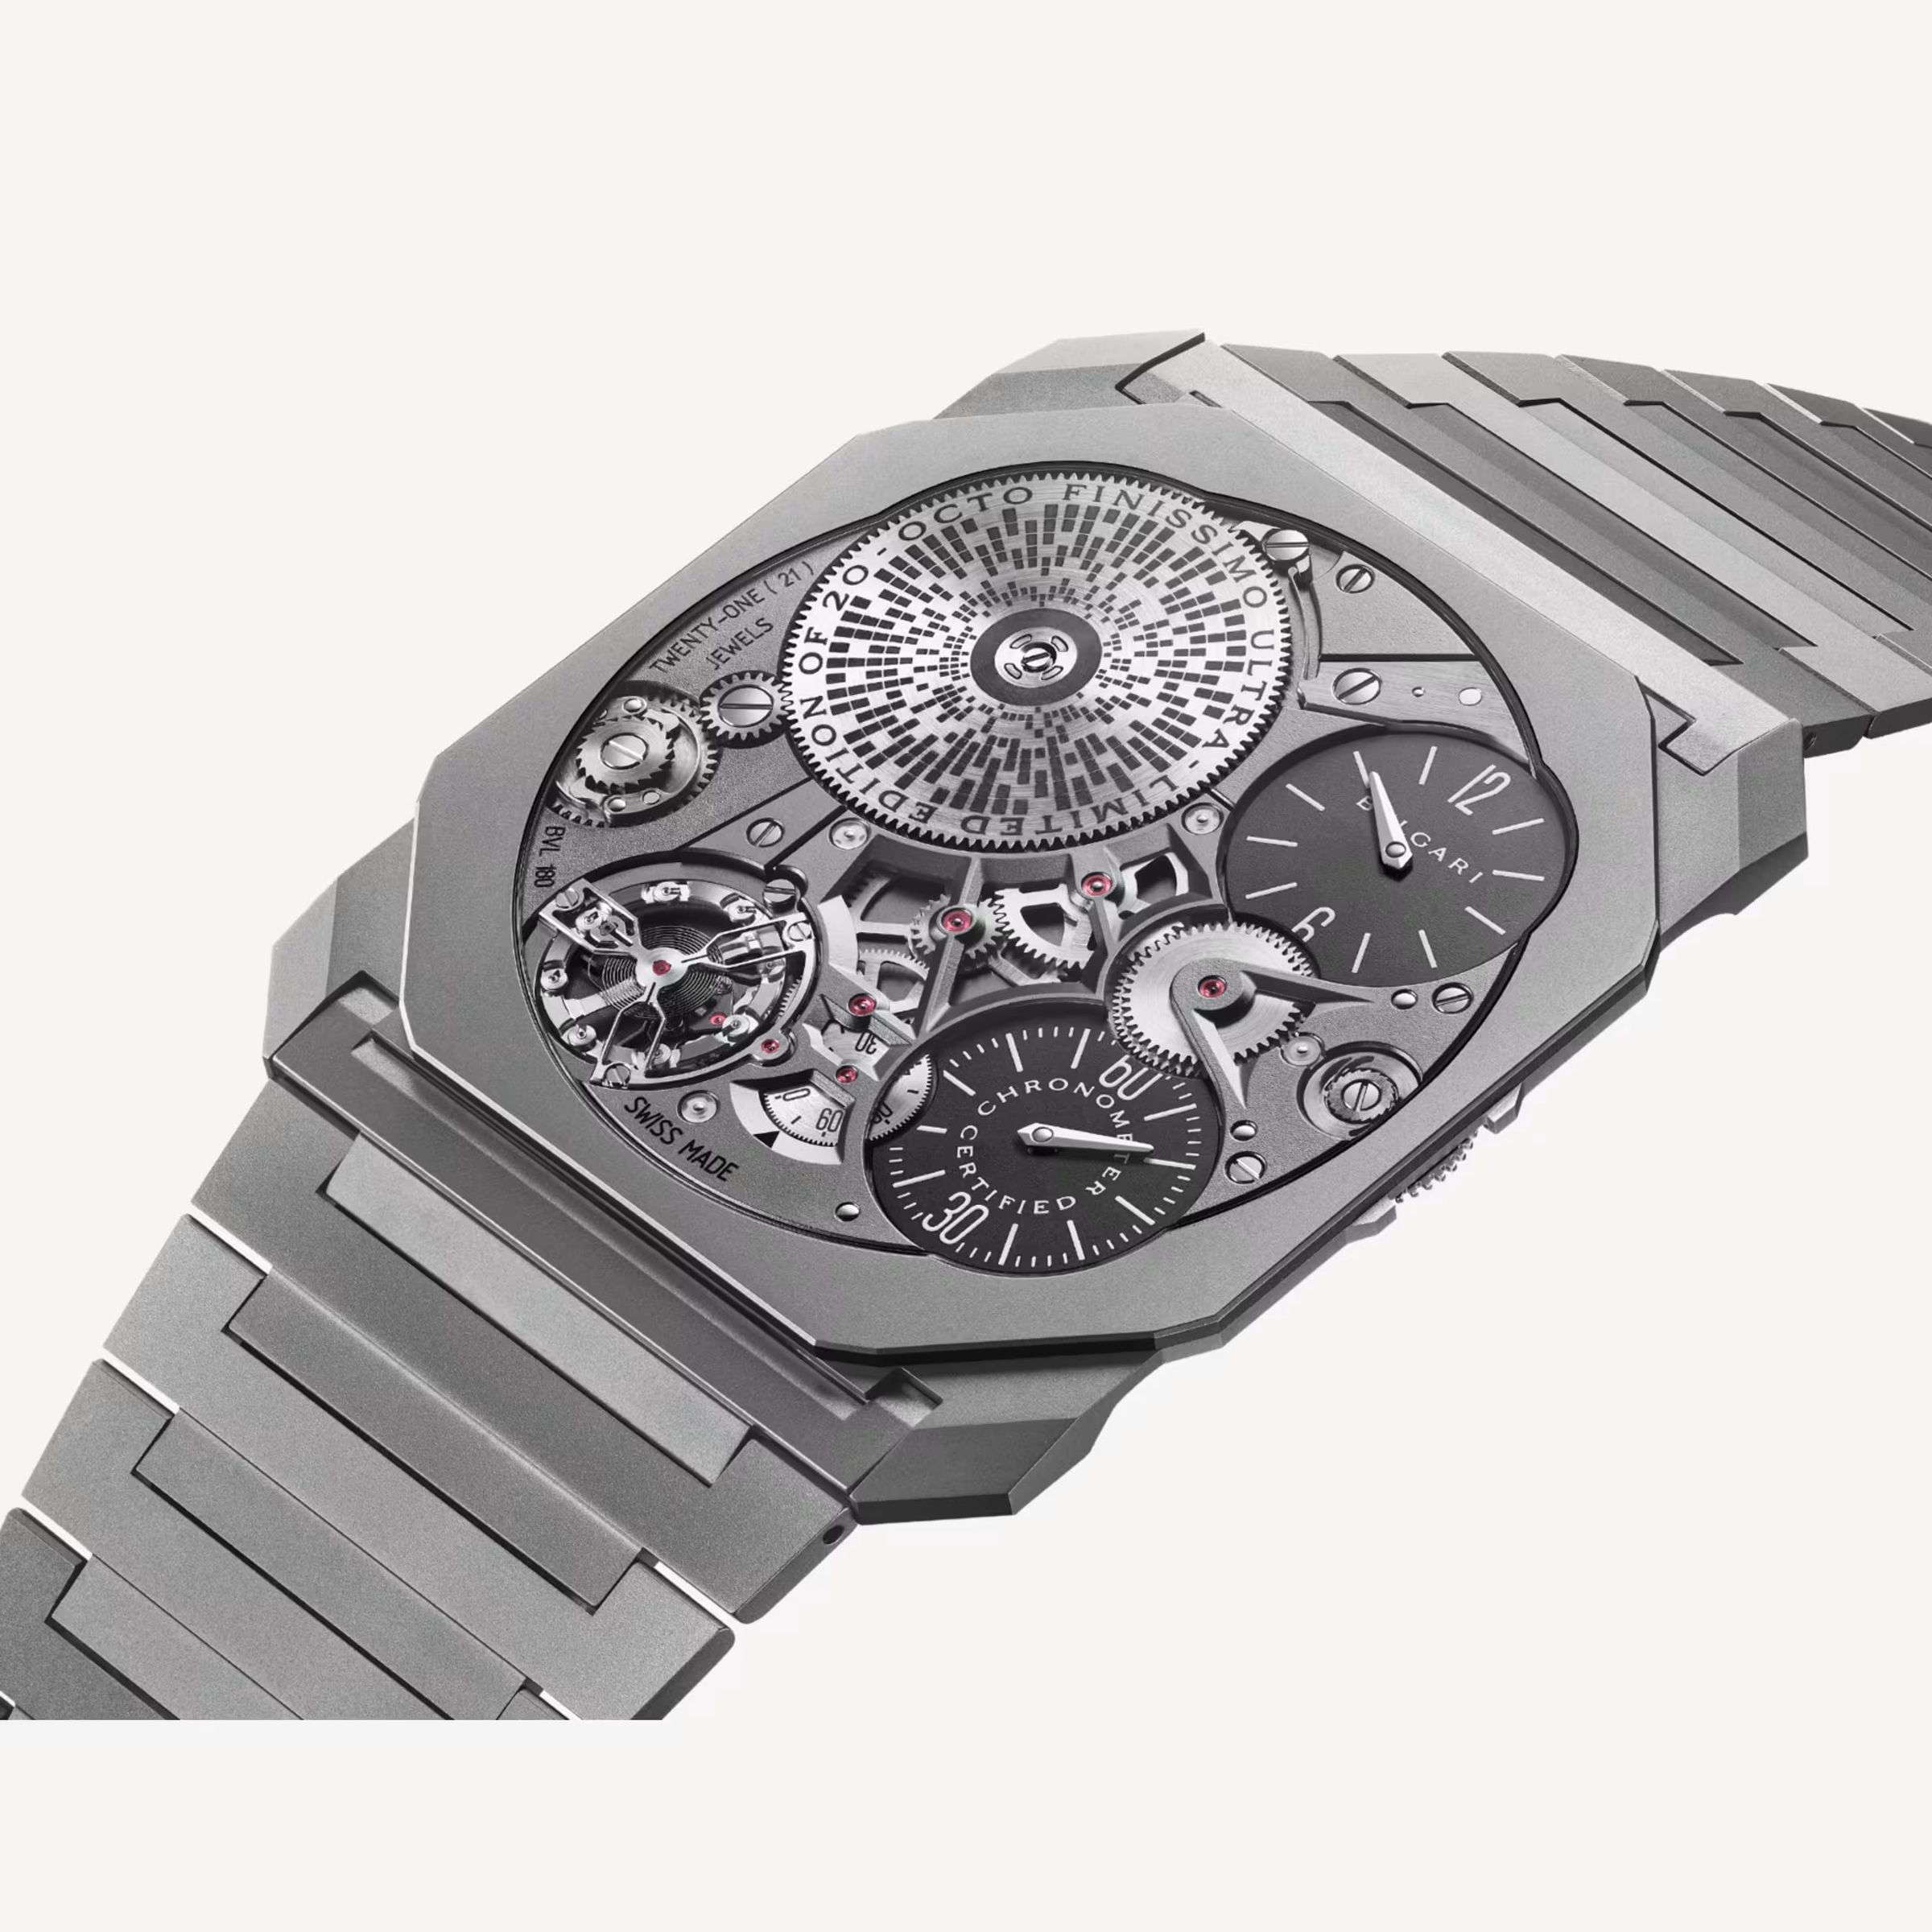 An image showing Bulgari’s Octo Finissimo Ultra COSC watch